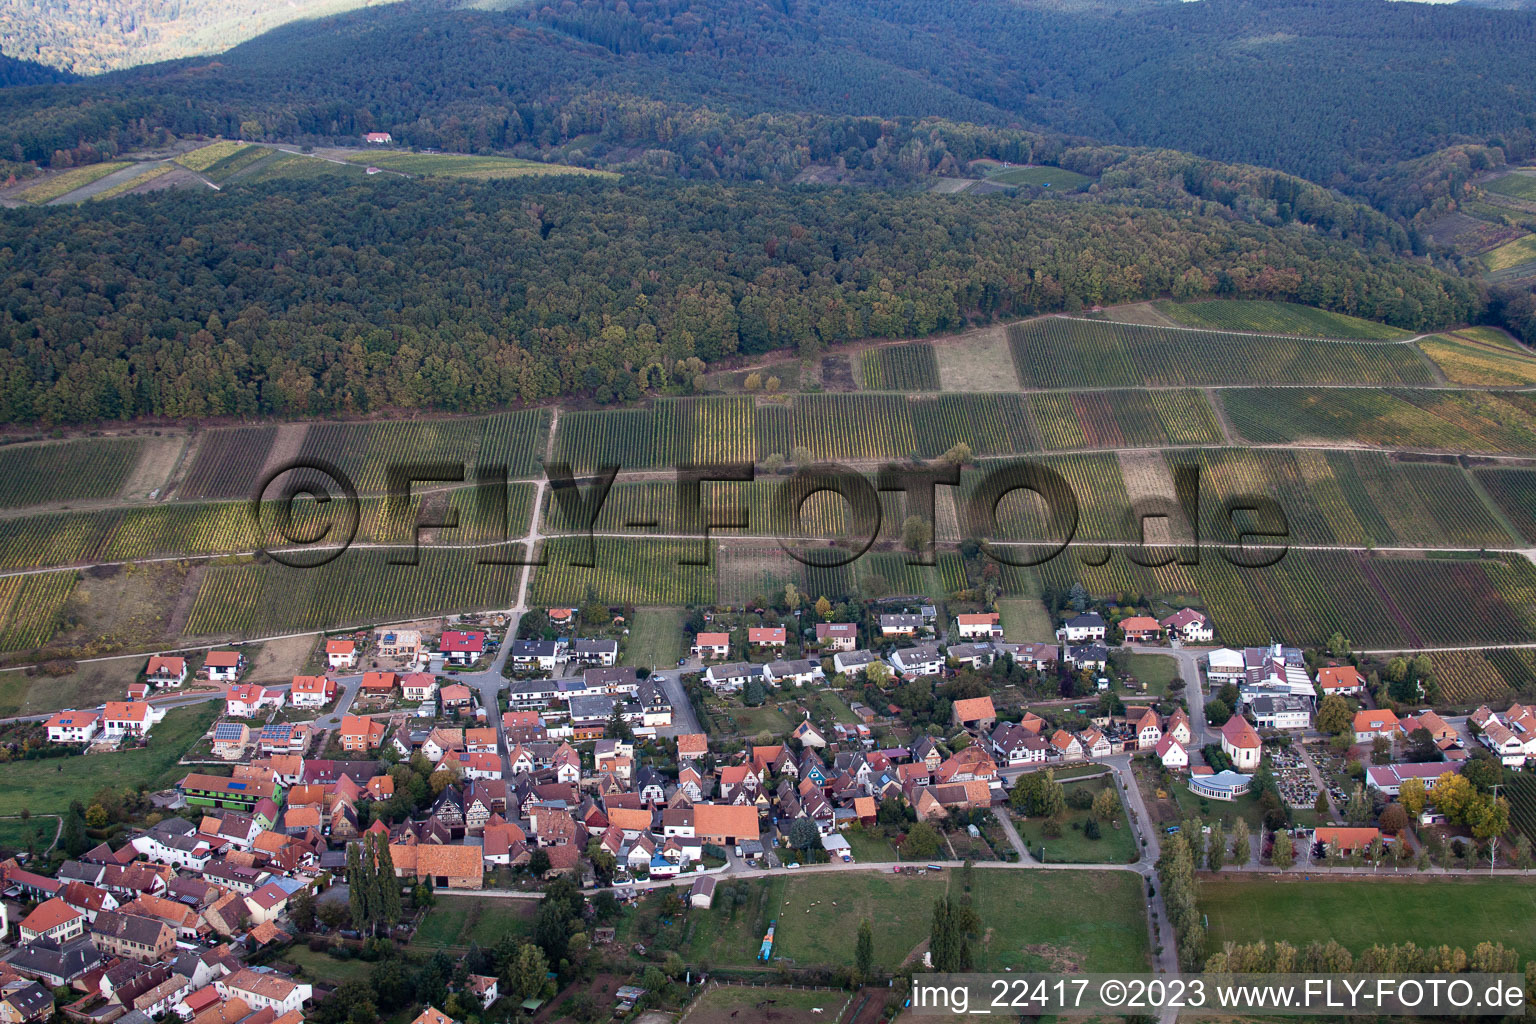 District Pleisweiler in Pleisweiler-Oberhofen in the state Rhineland-Palatinate, Germany from the plane